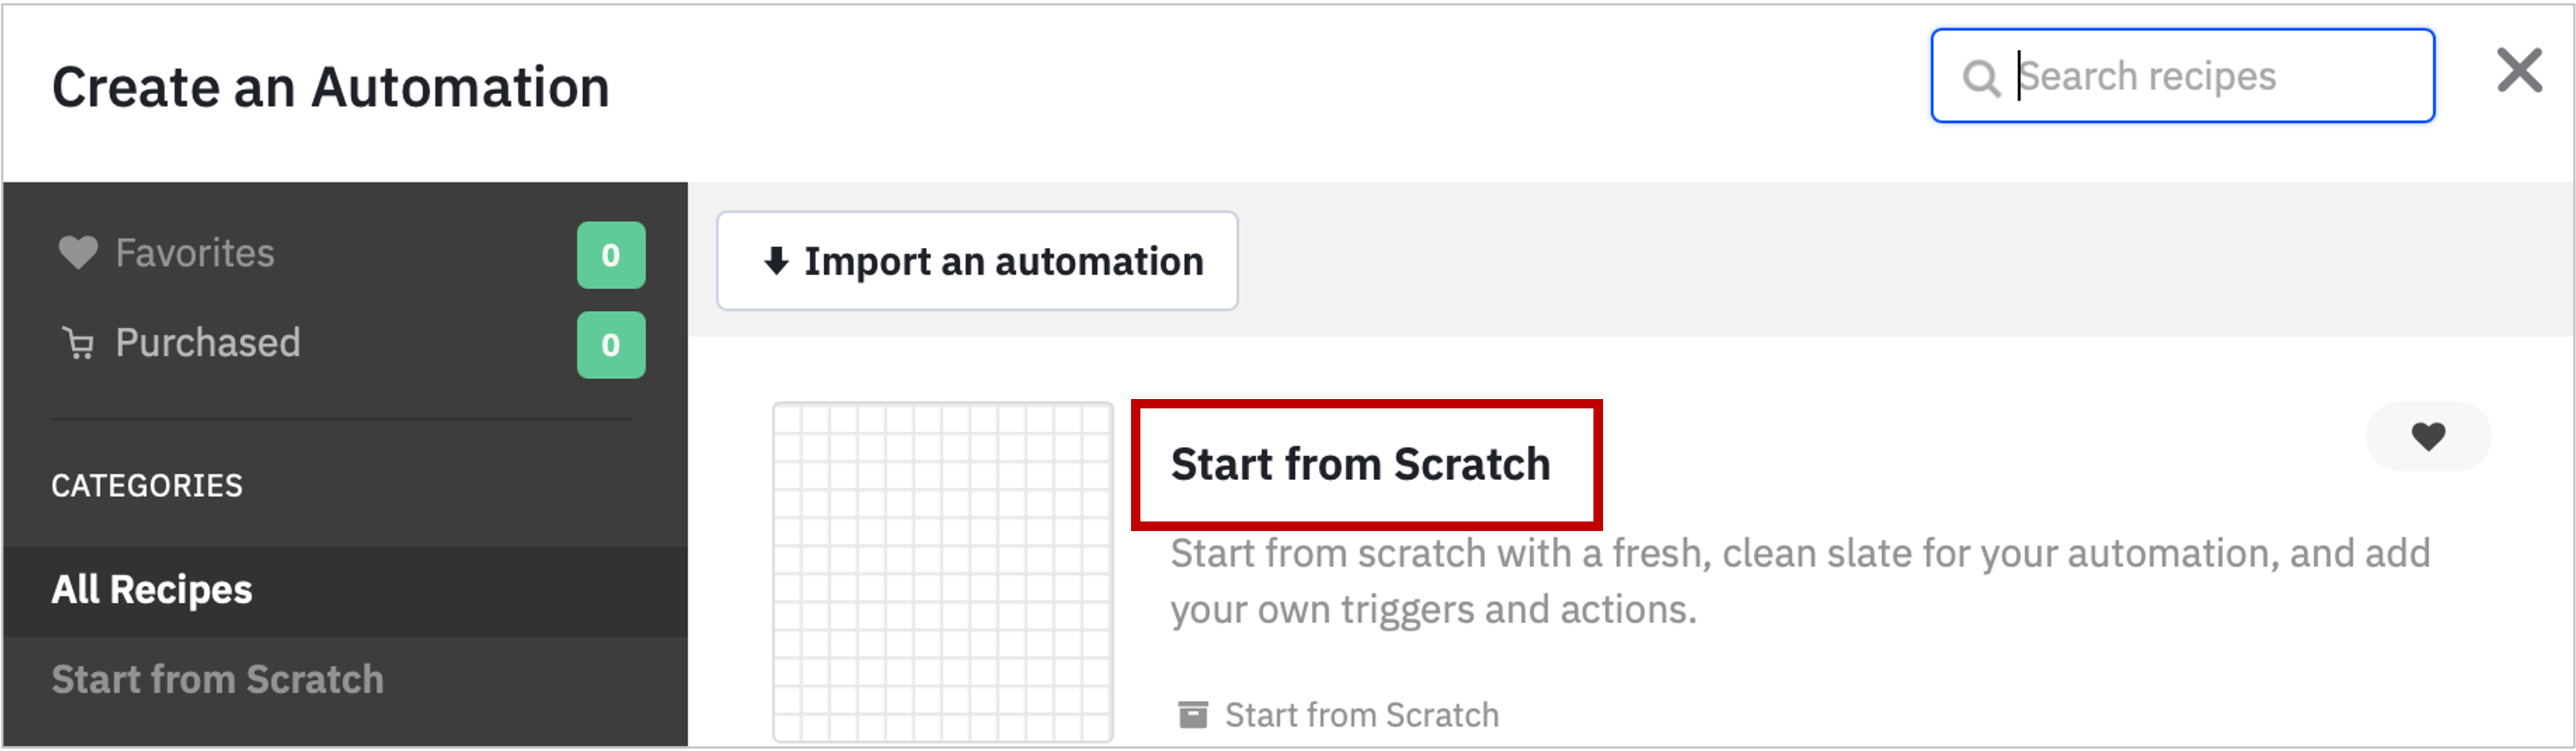 create-automation-scratch.png